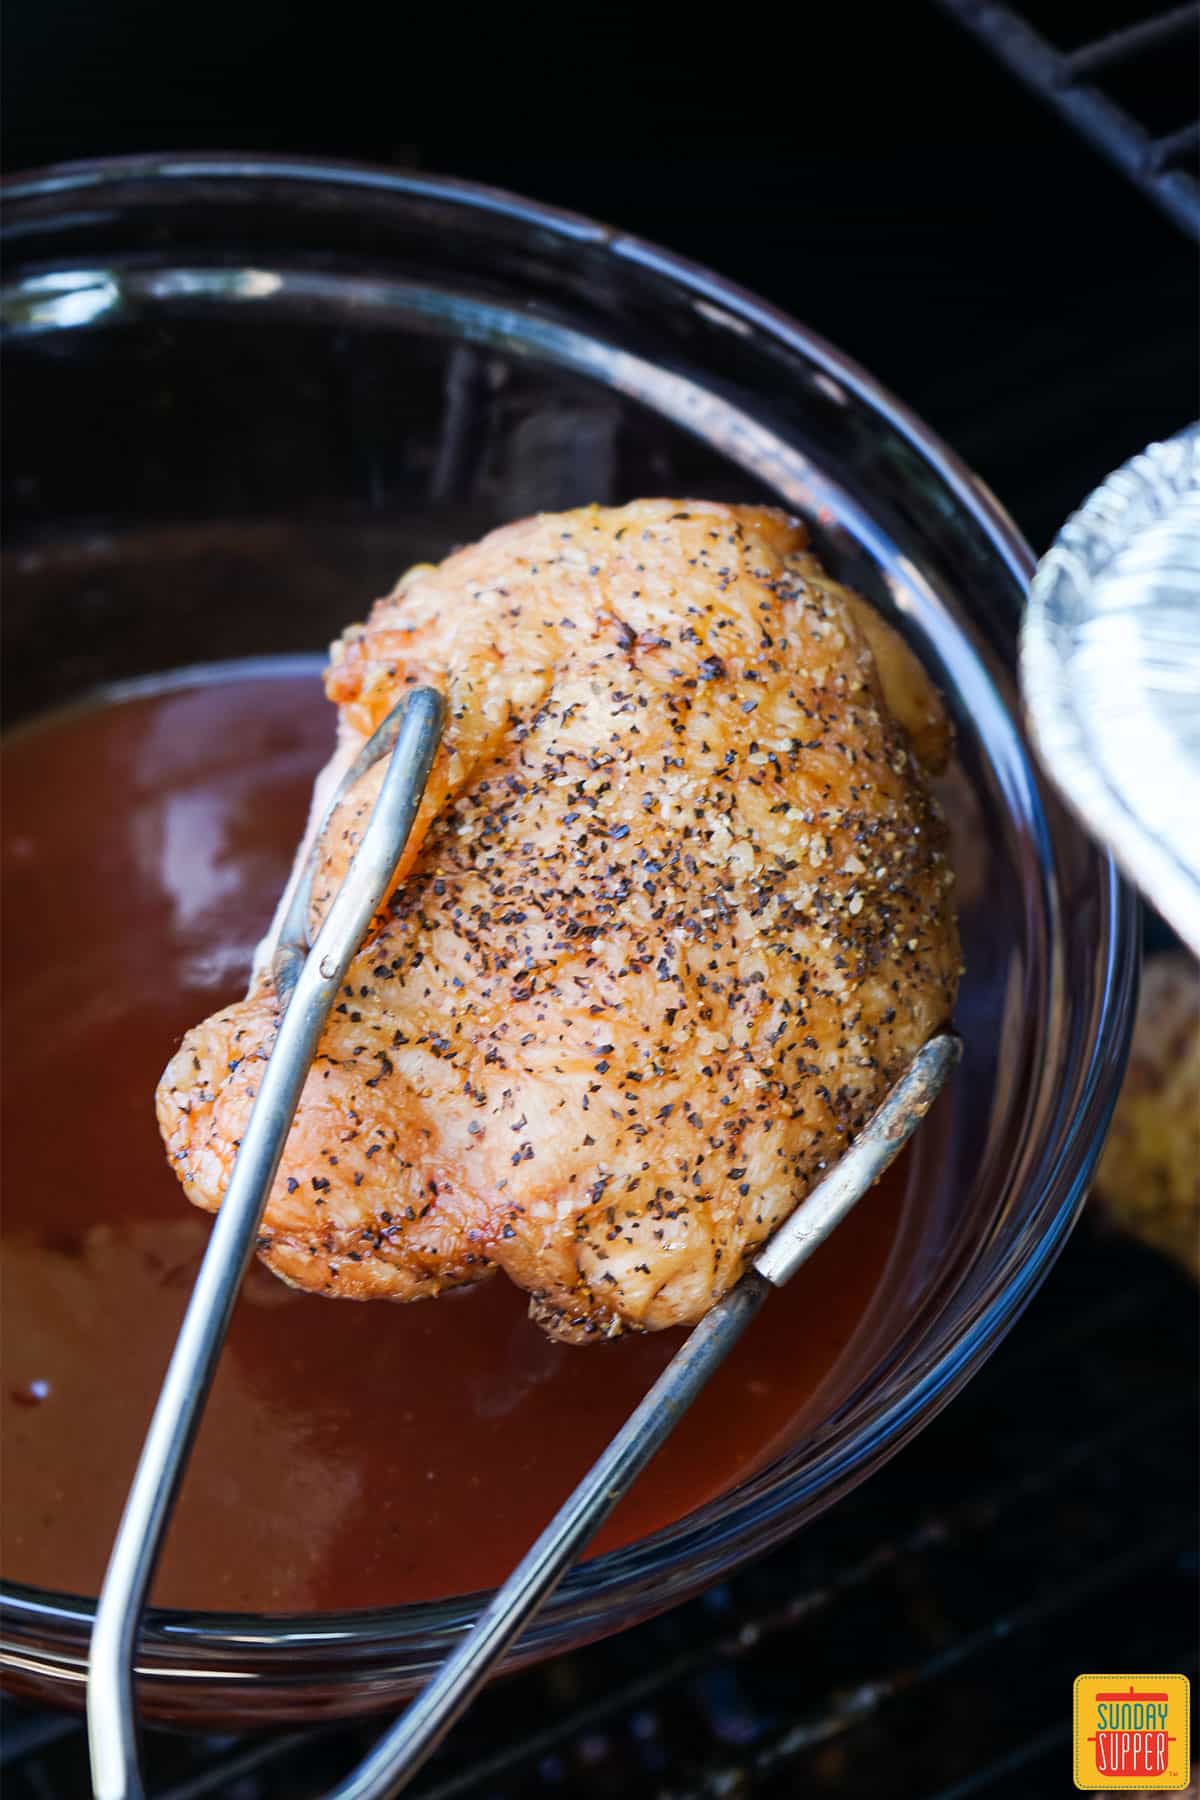 Dipping a chicken thigh in BBQ sauce